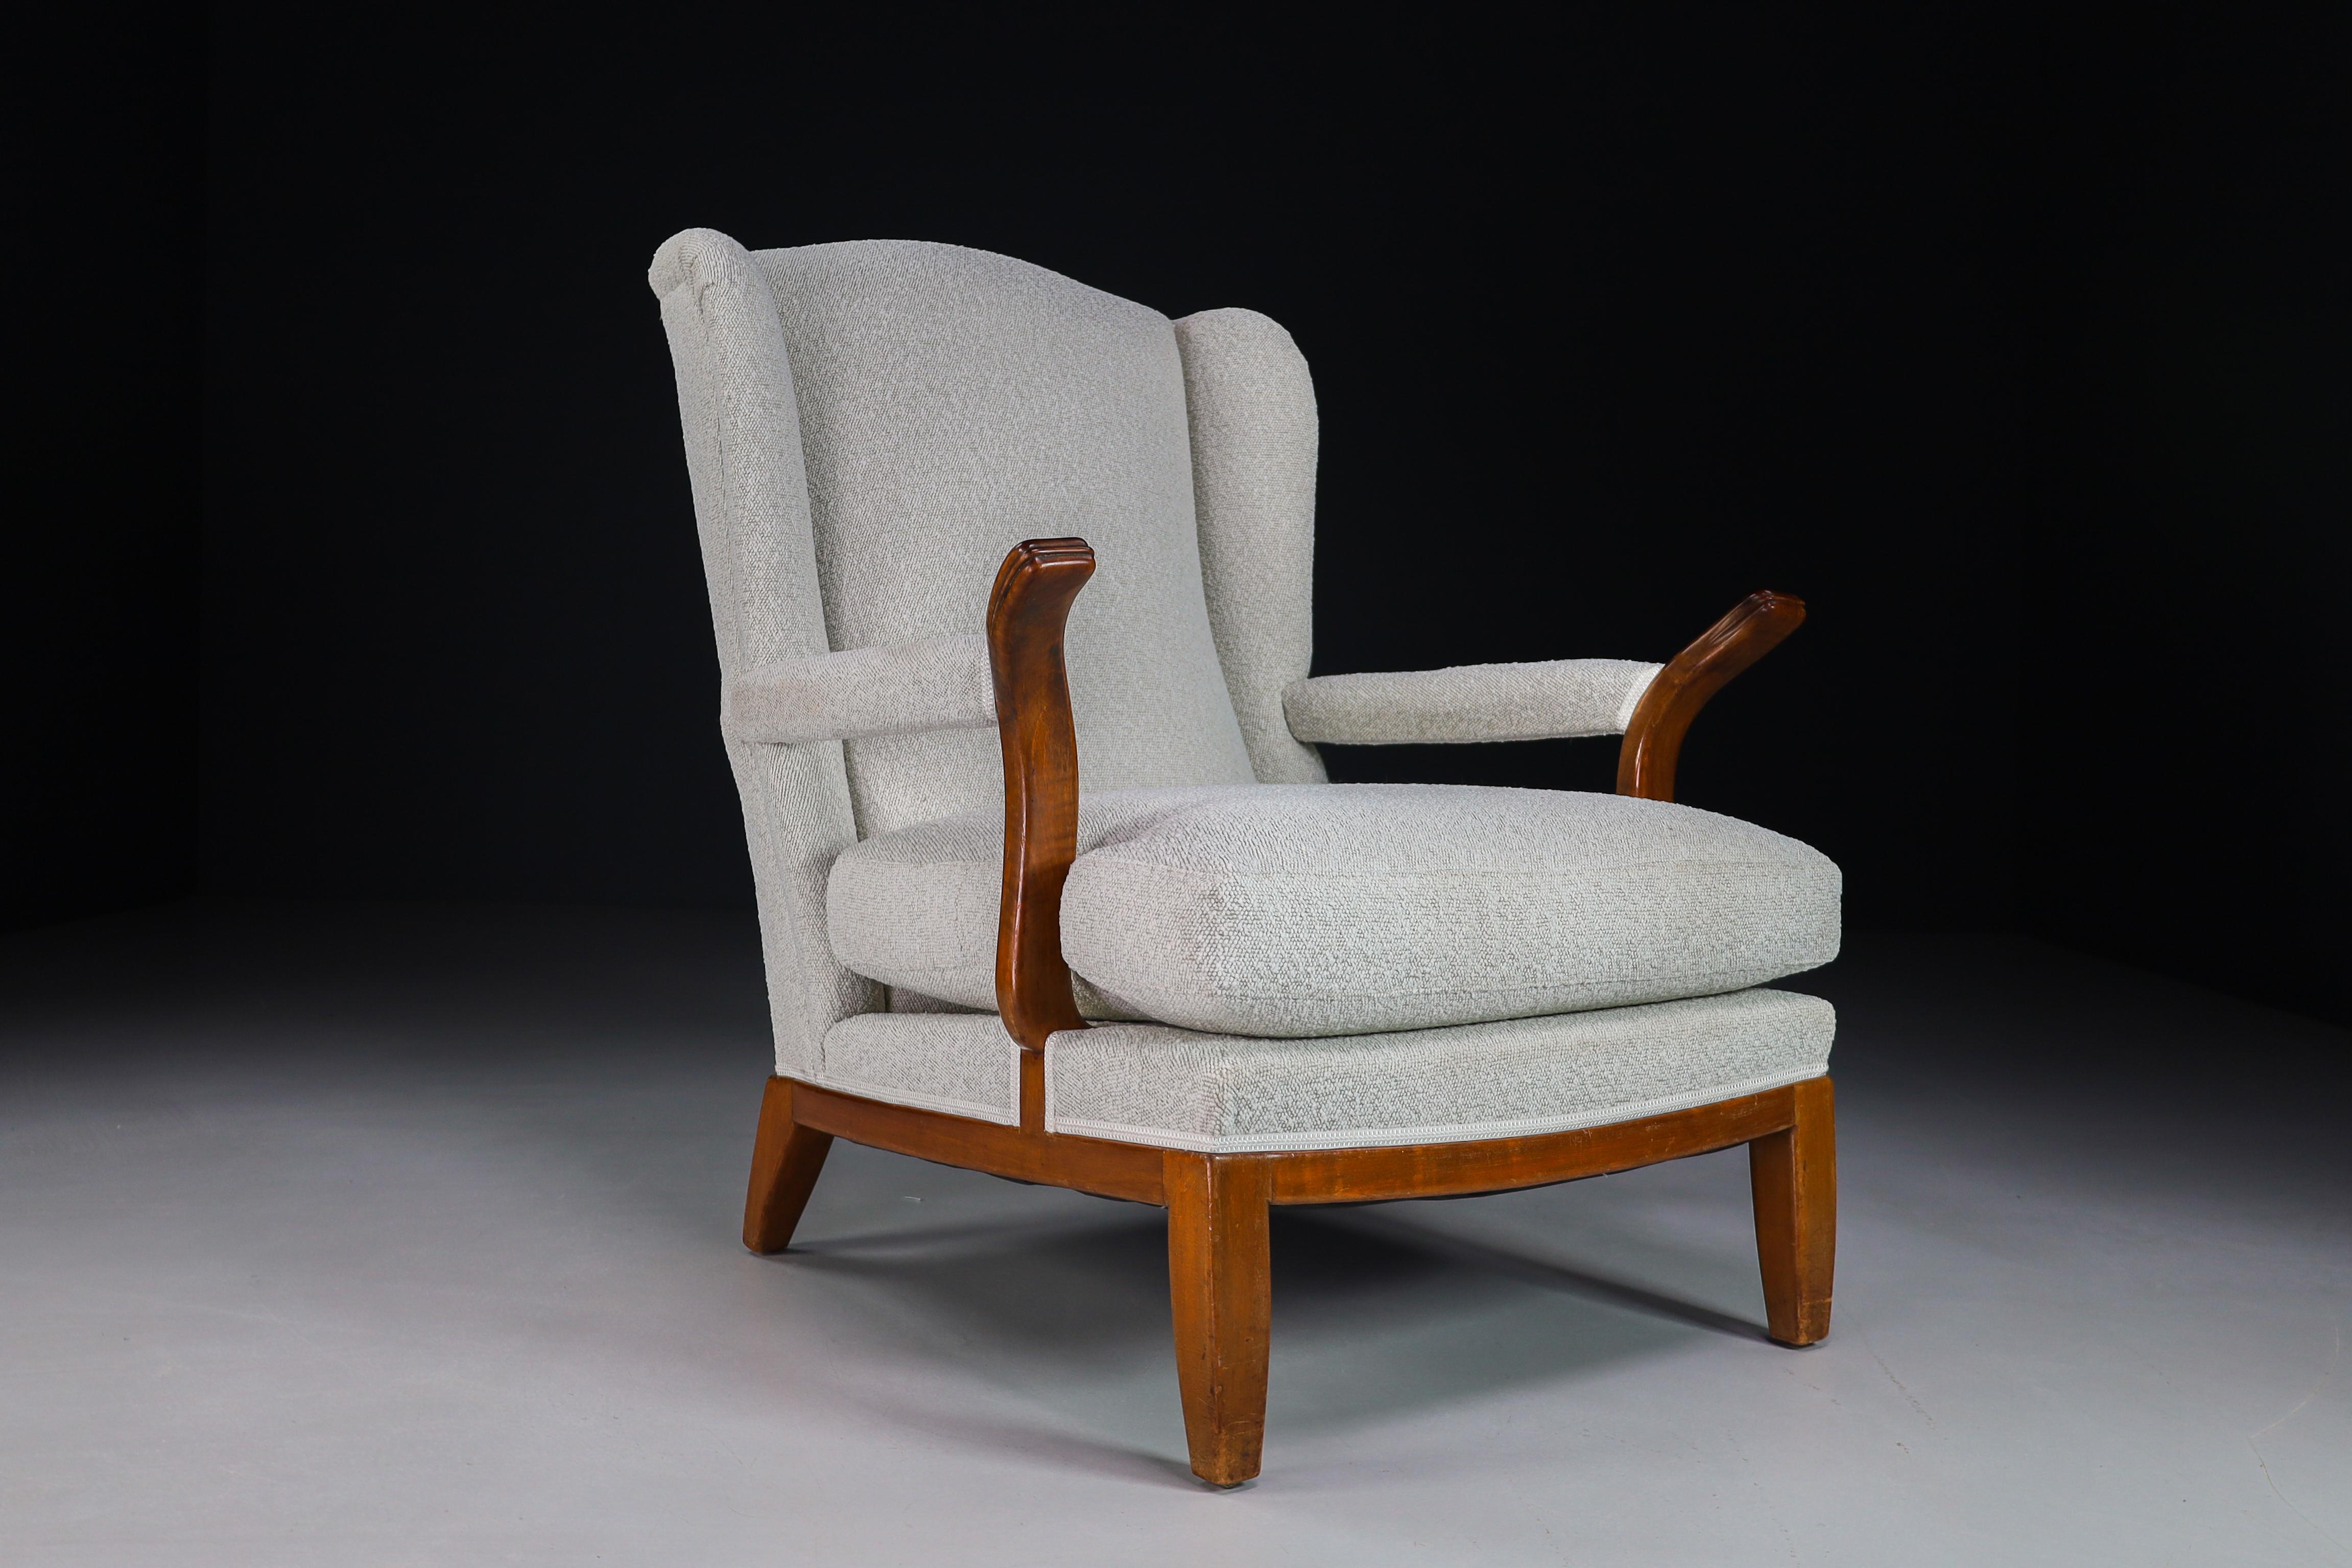 Large Wingback Chair in Walnut and New Bouclé Fabric, France, 1930s For Sale 4